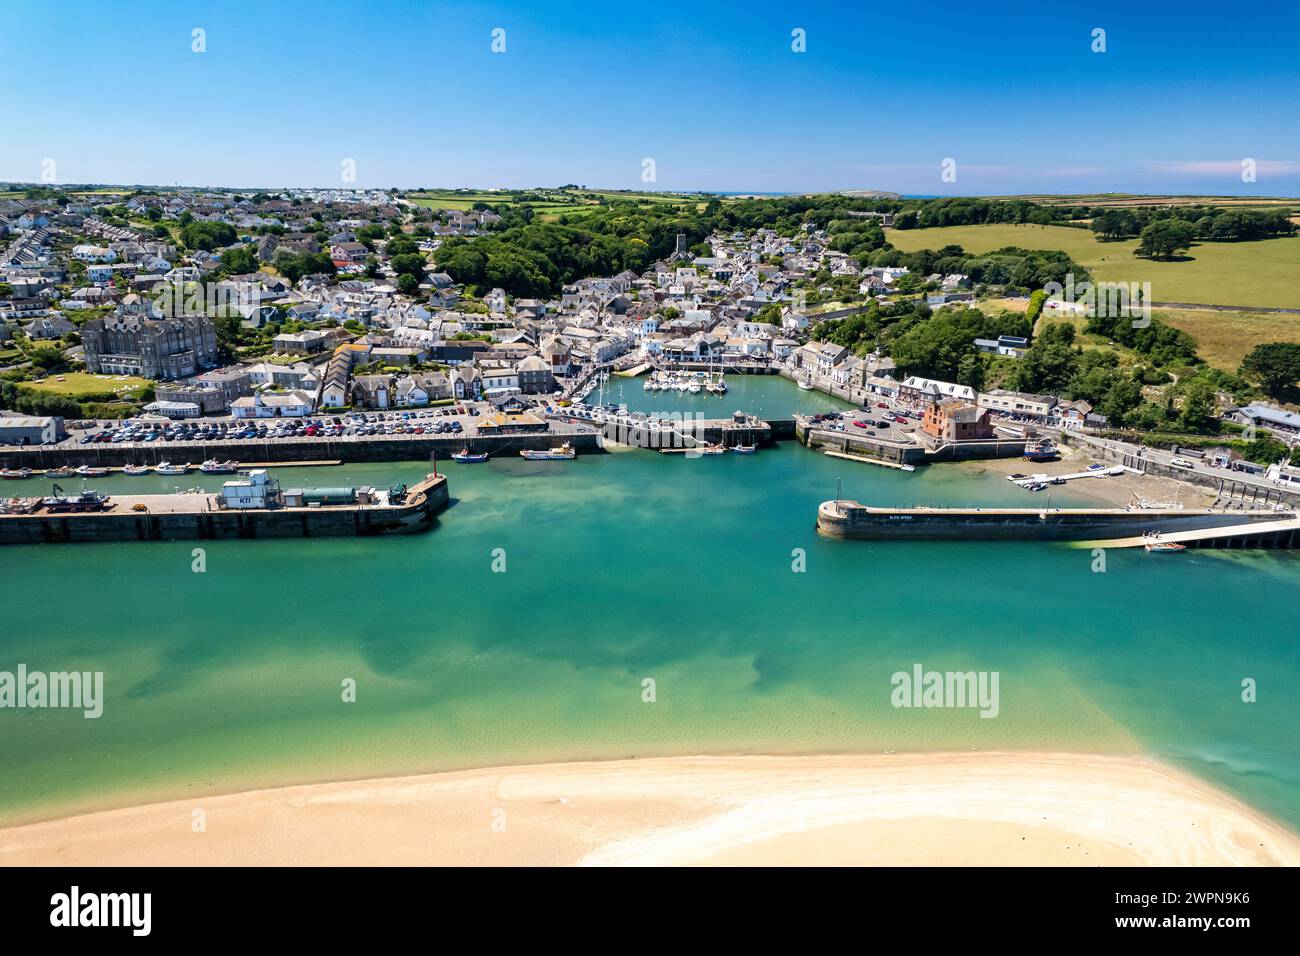 Padstow seen from the air, Cornwall, England, Great Britain, Europe Stock Photo